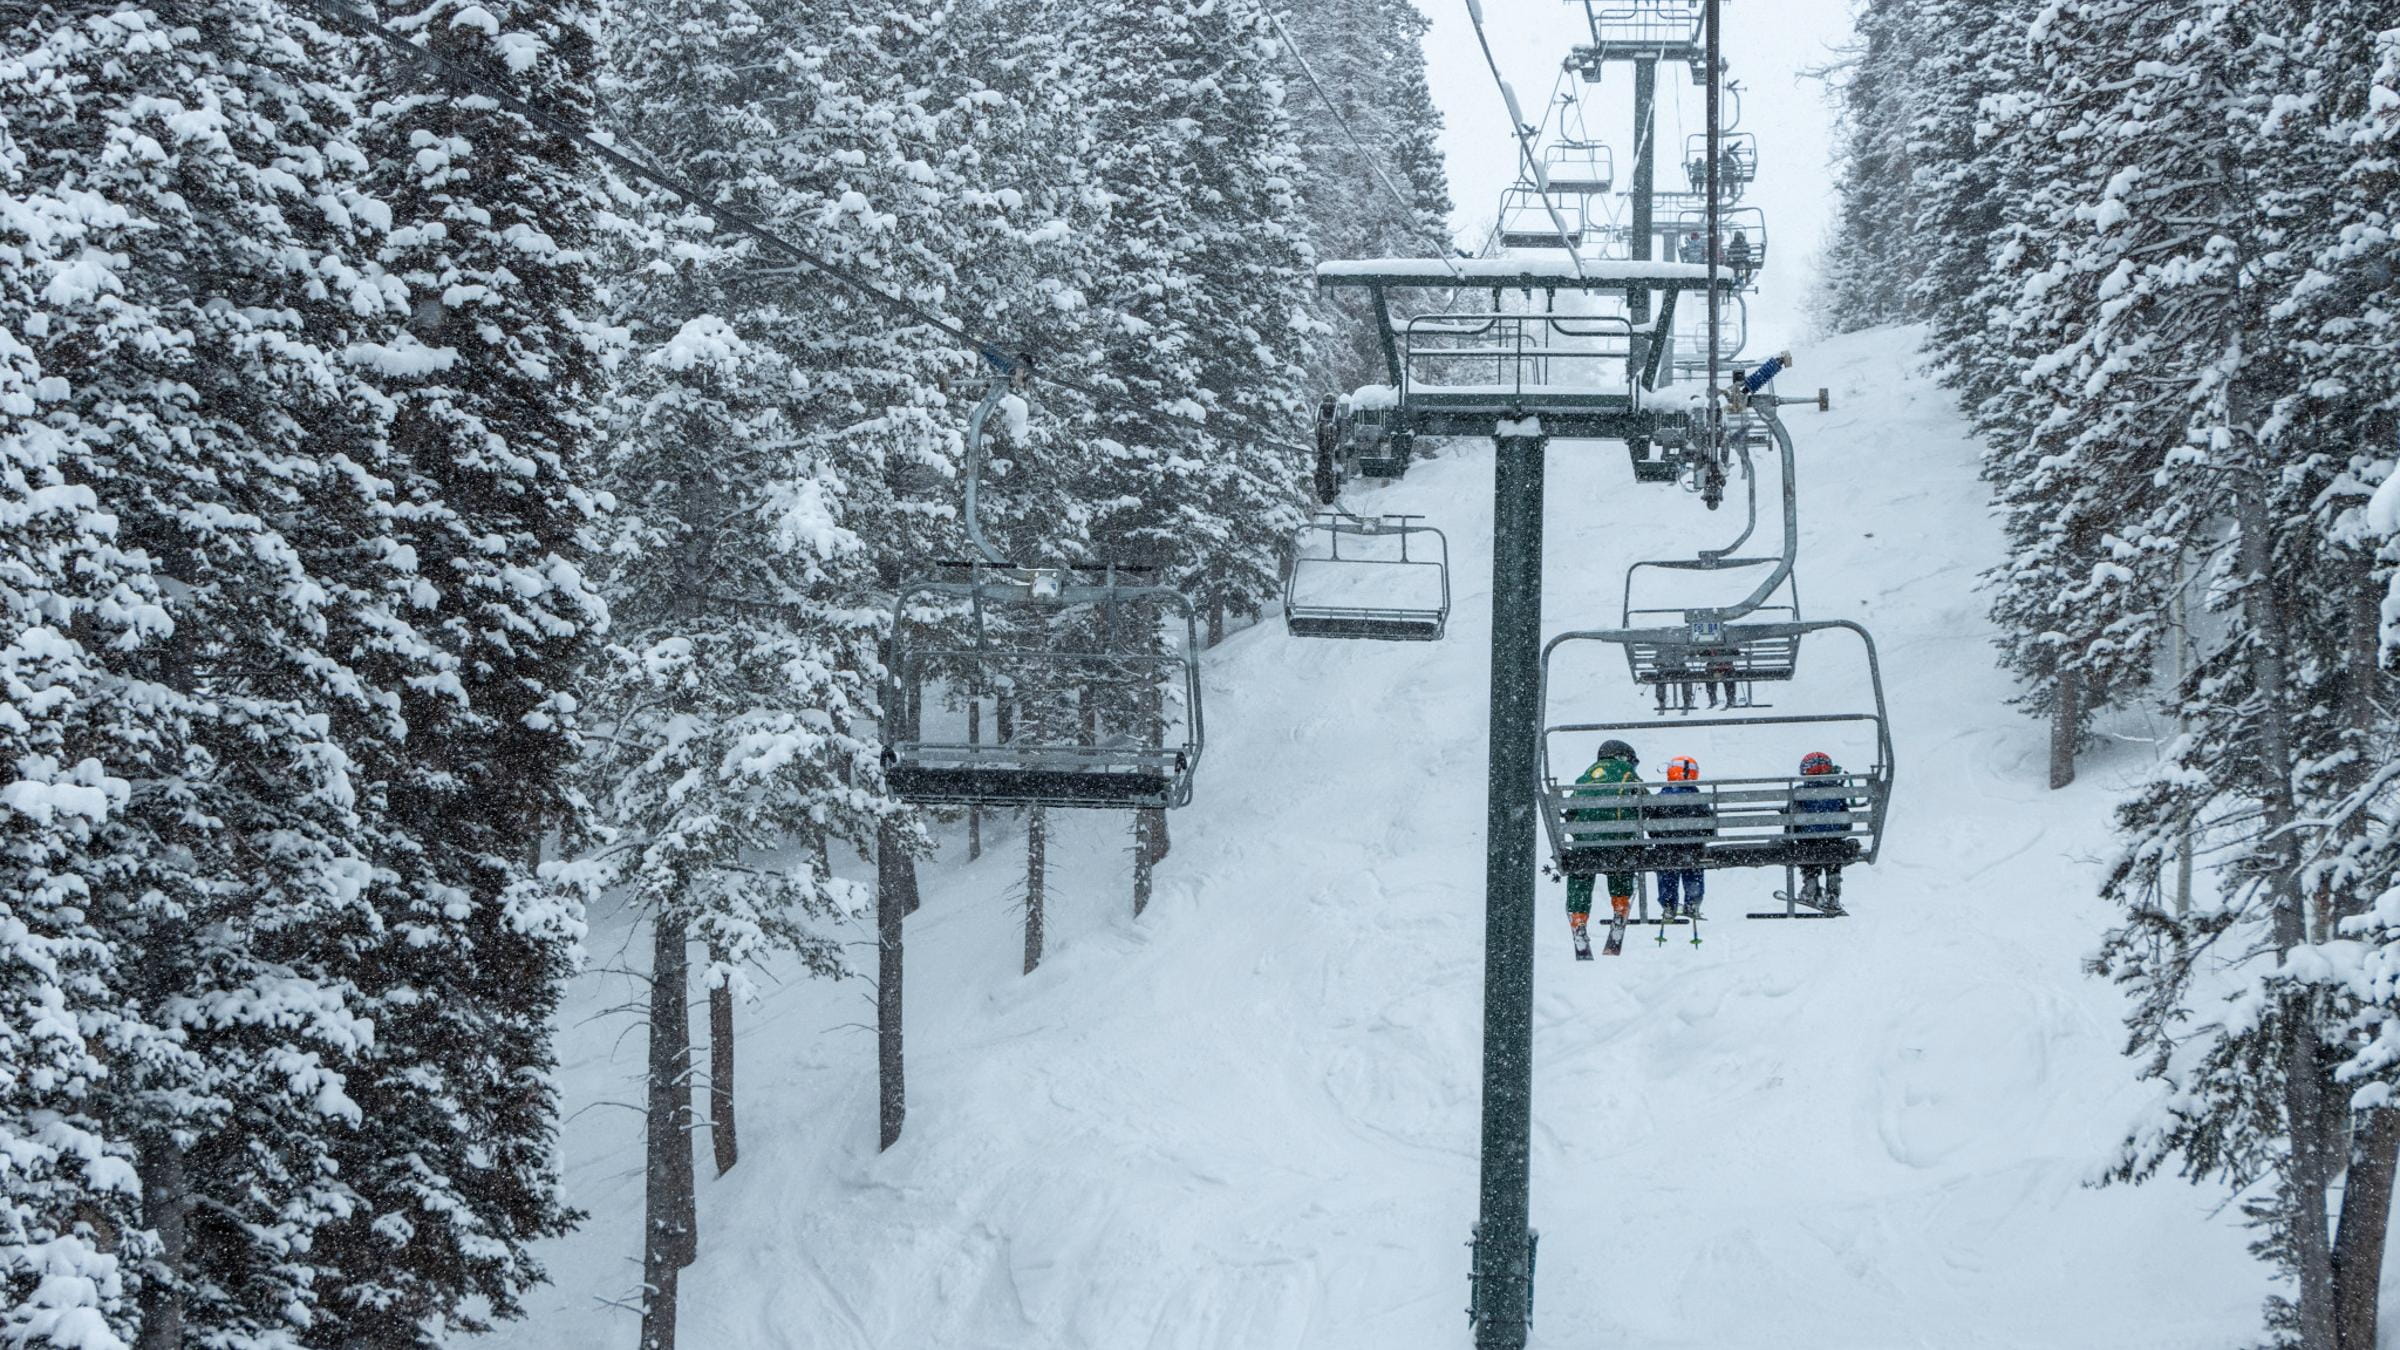 Guests riding up a chairlift at Deer Valley Resort while its snowing